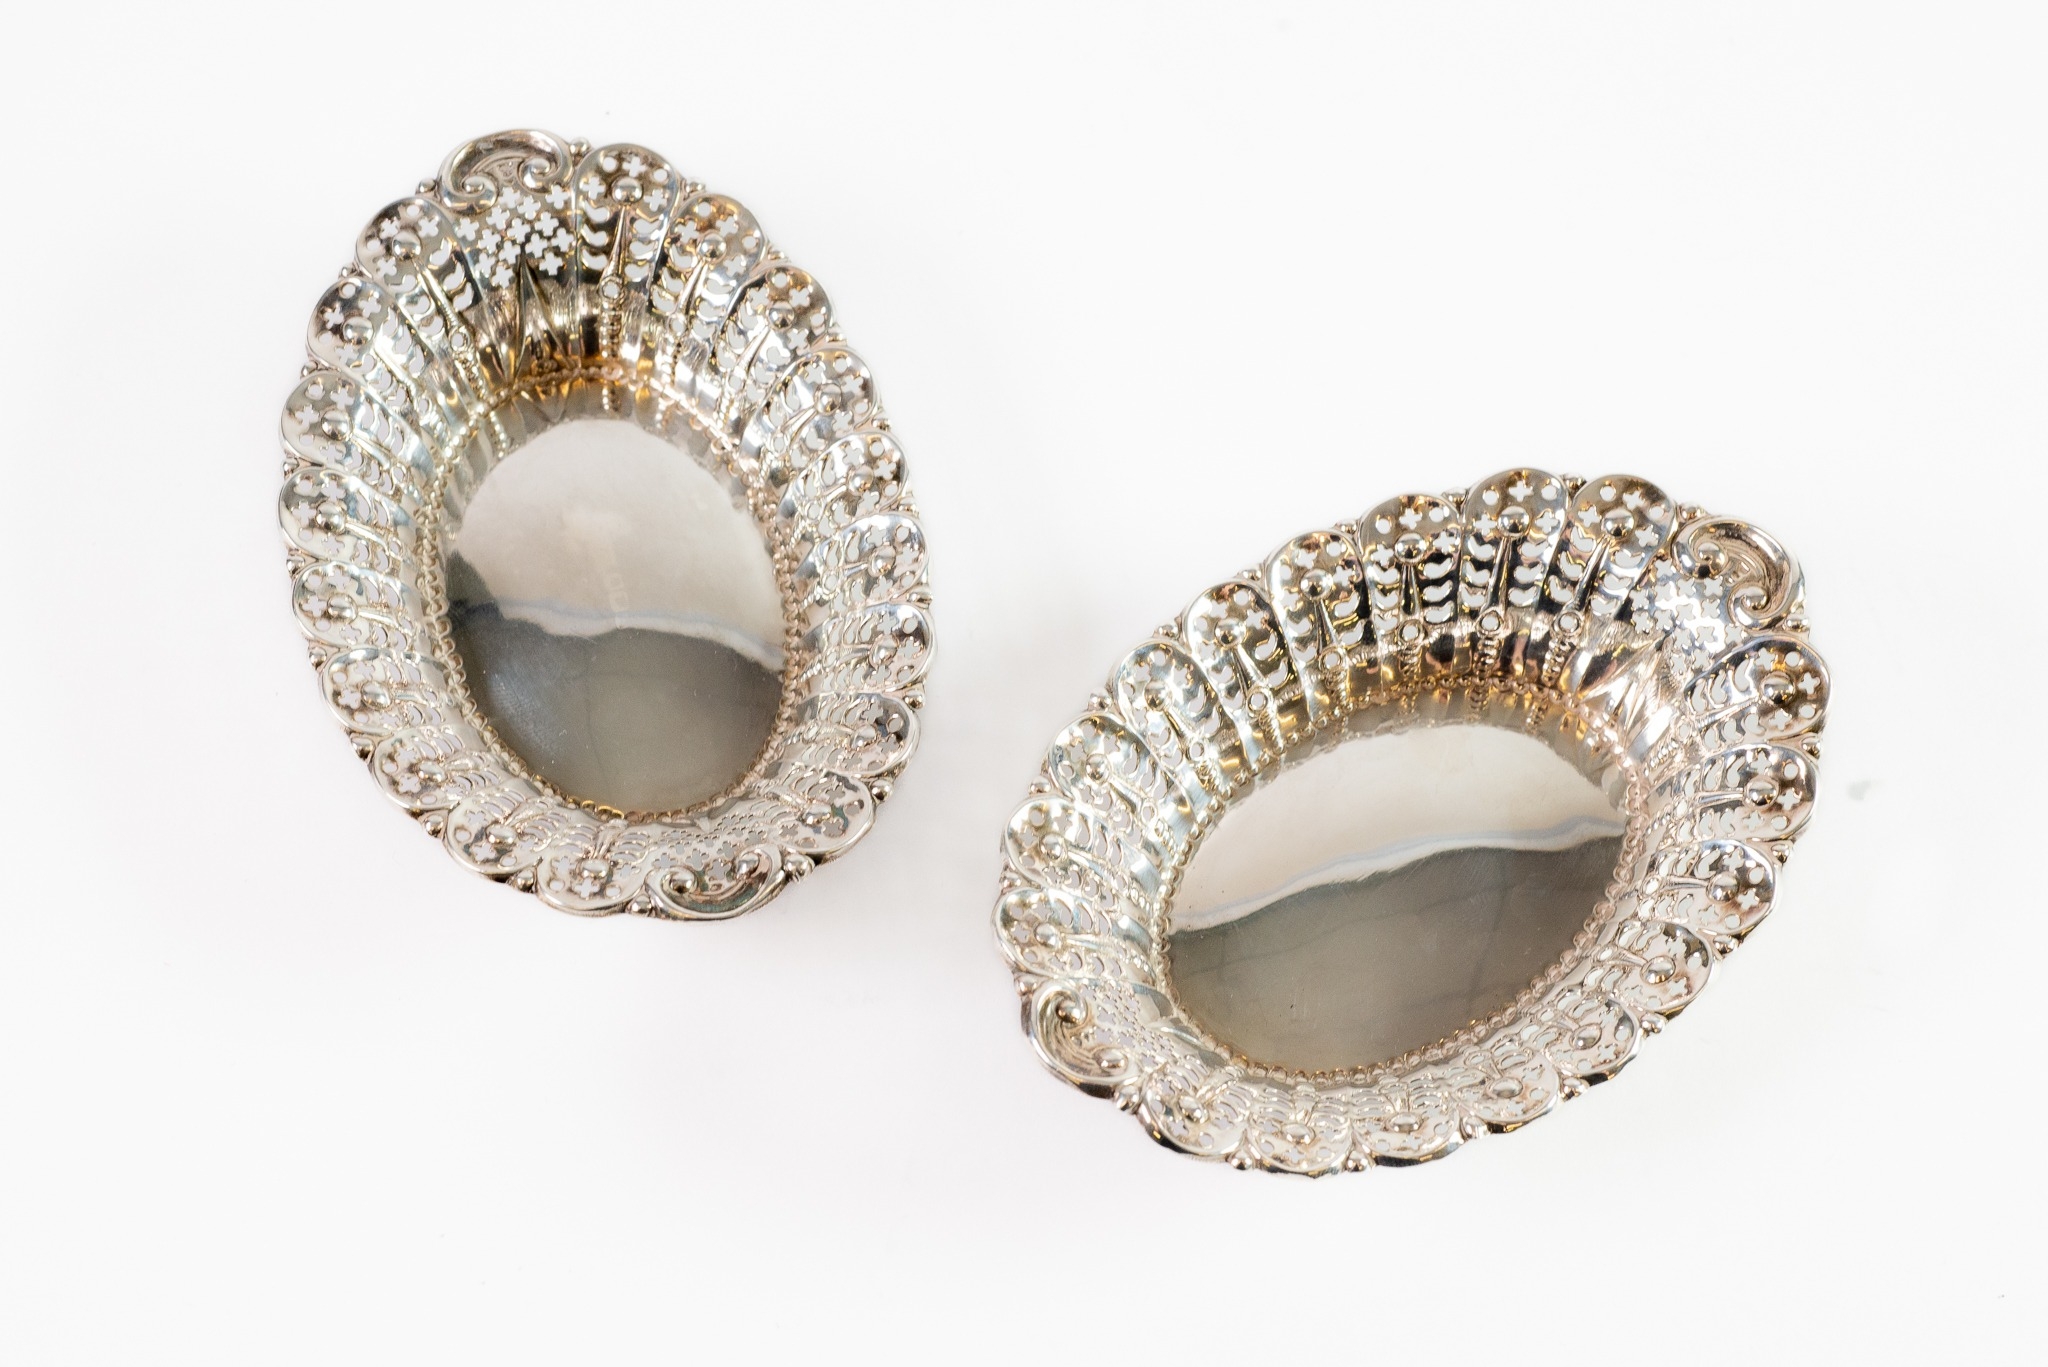 LATE VICTORIAN PAIR OF PIERCED SILVER SWEET MEAT DISHES BY JAMES DIXON & SONS, each of oval form